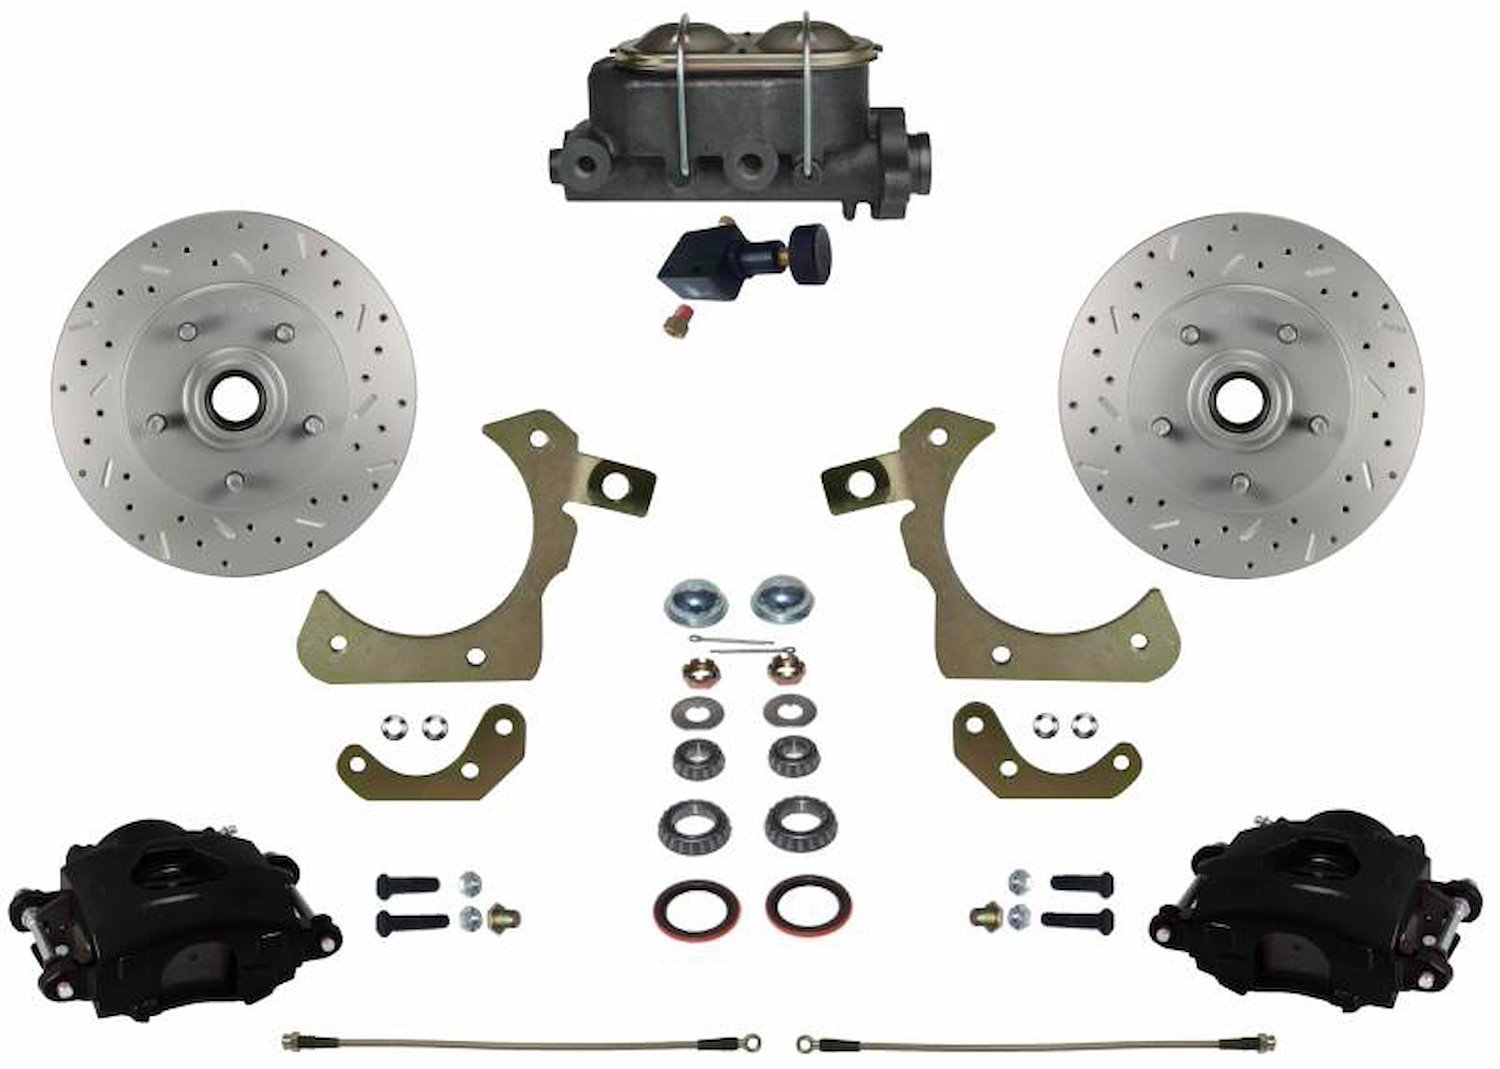 GM B-Body, GM Full Size Front Disc Brake Conversion Kit for Factory Spindles